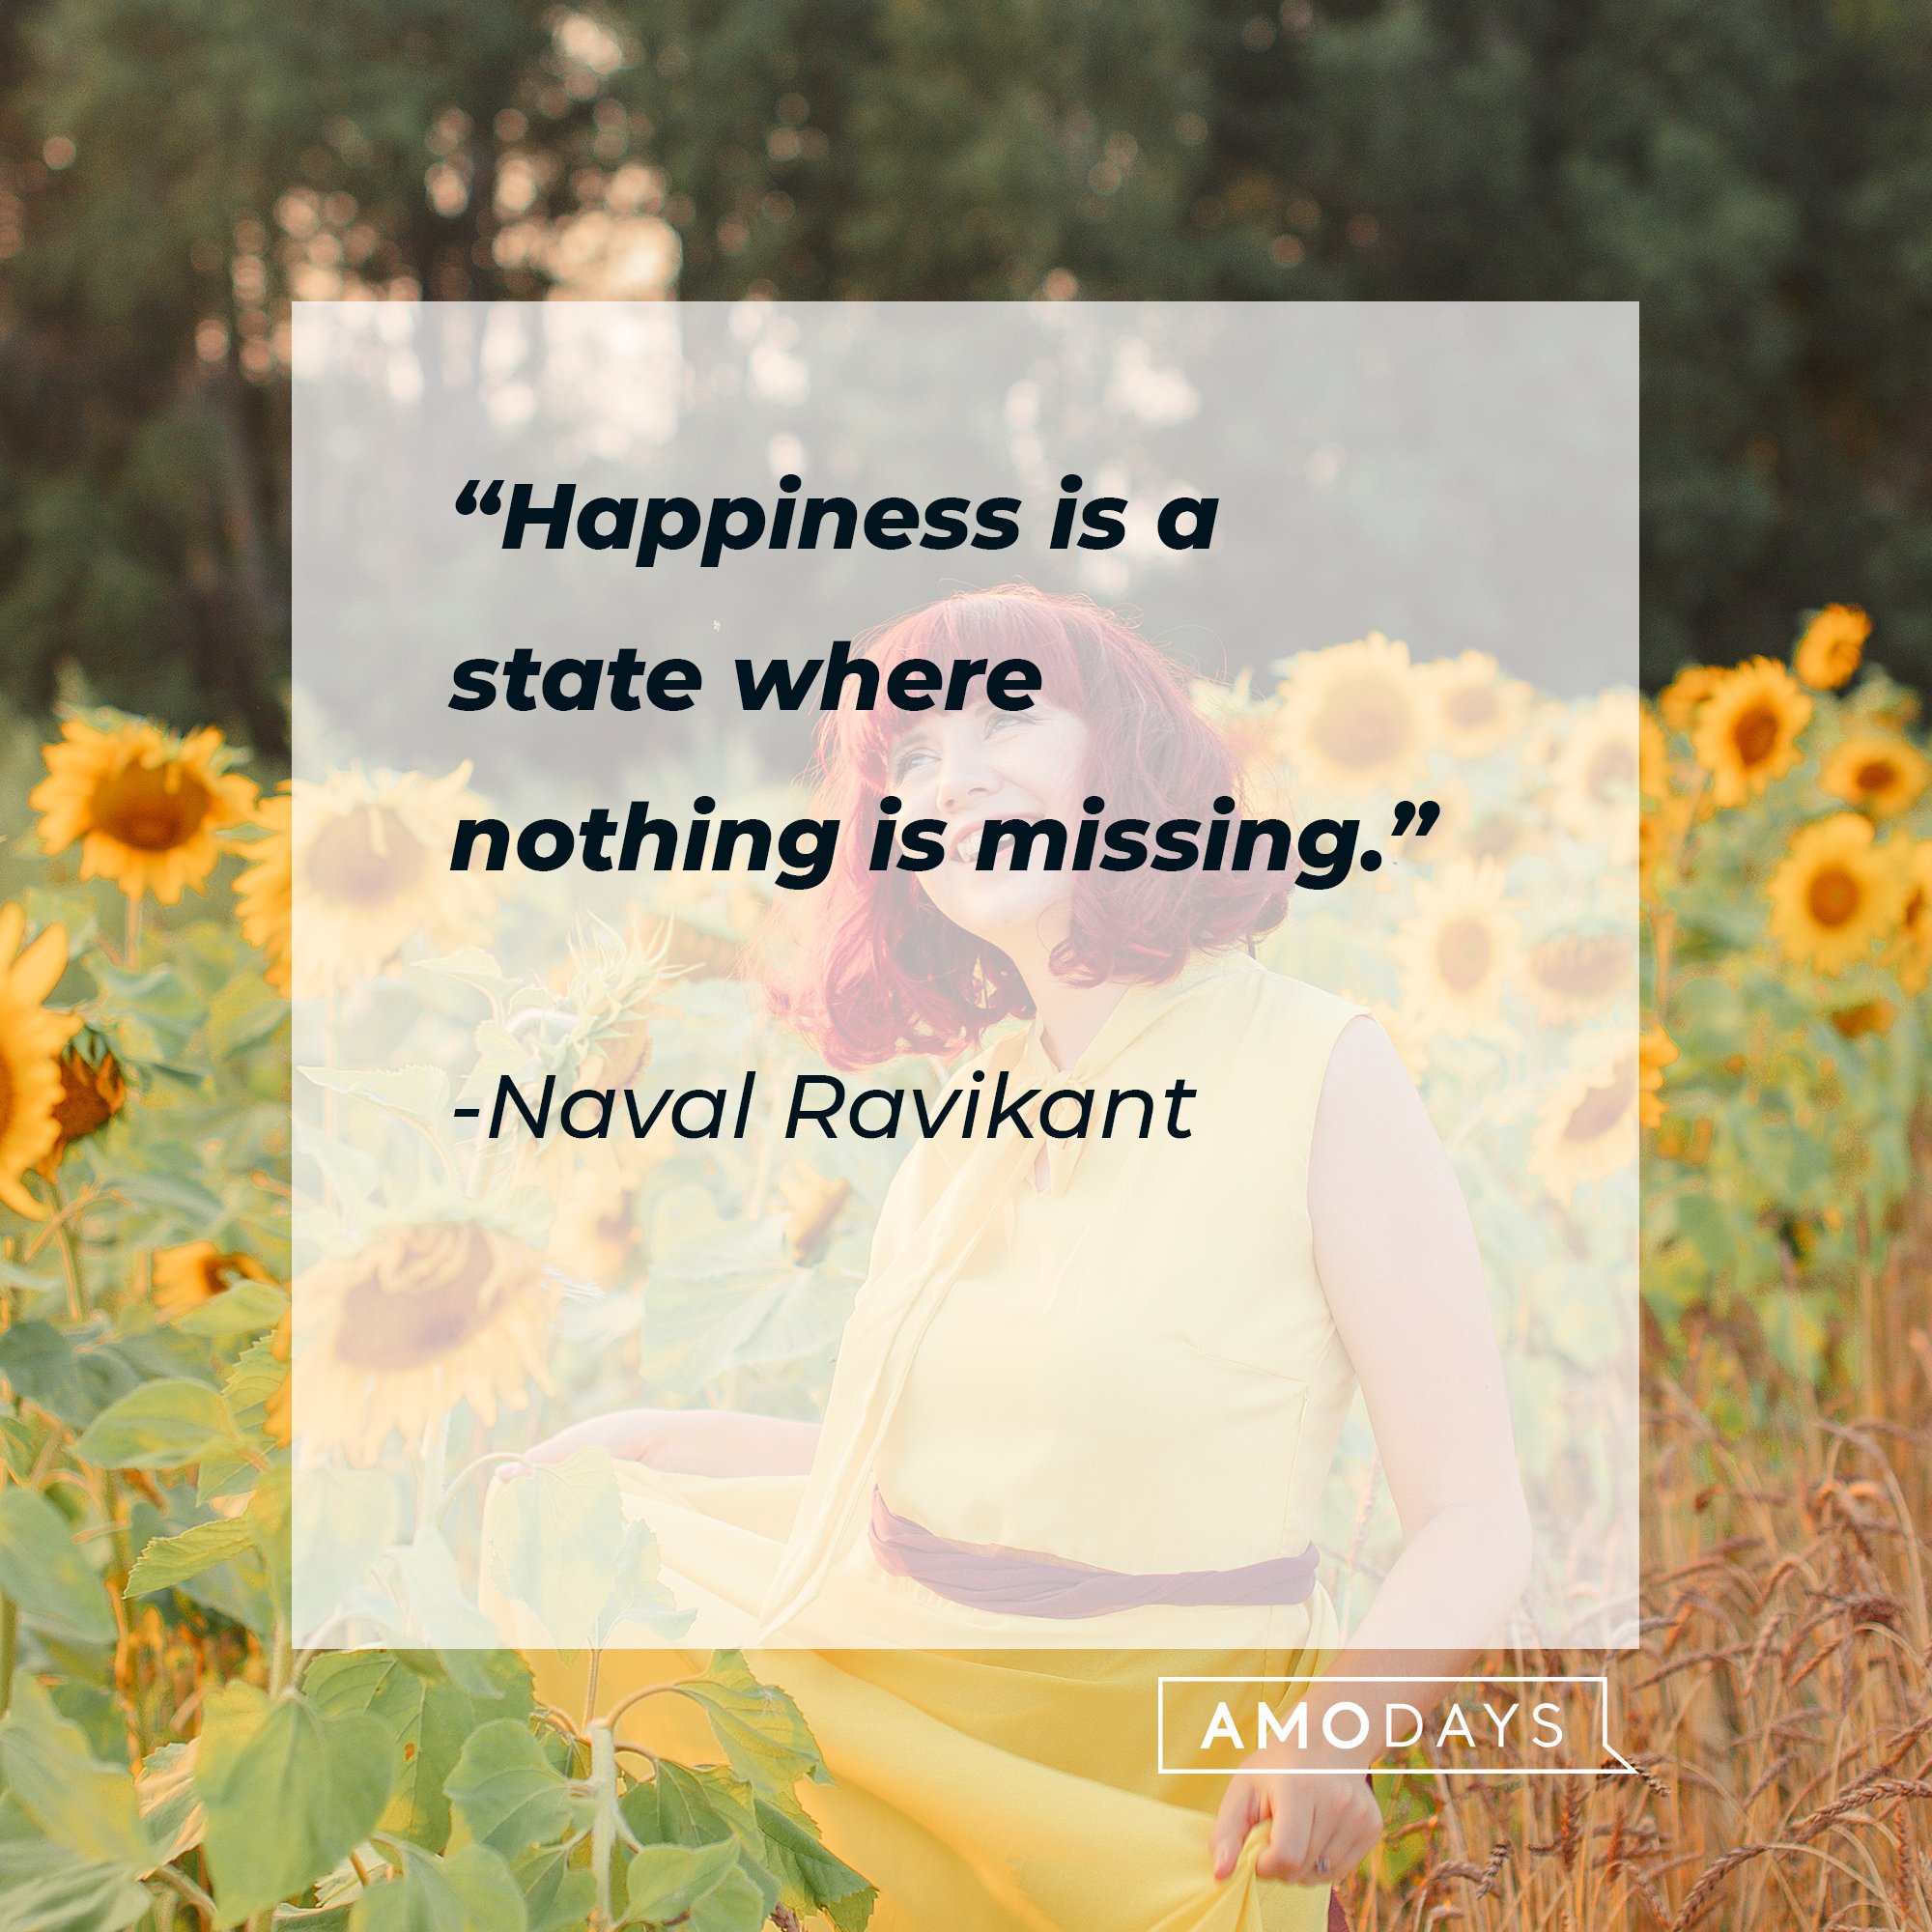 Naval Ravikant's quote: "Happiness is a state where nothing is missing." | Image: AmoDays